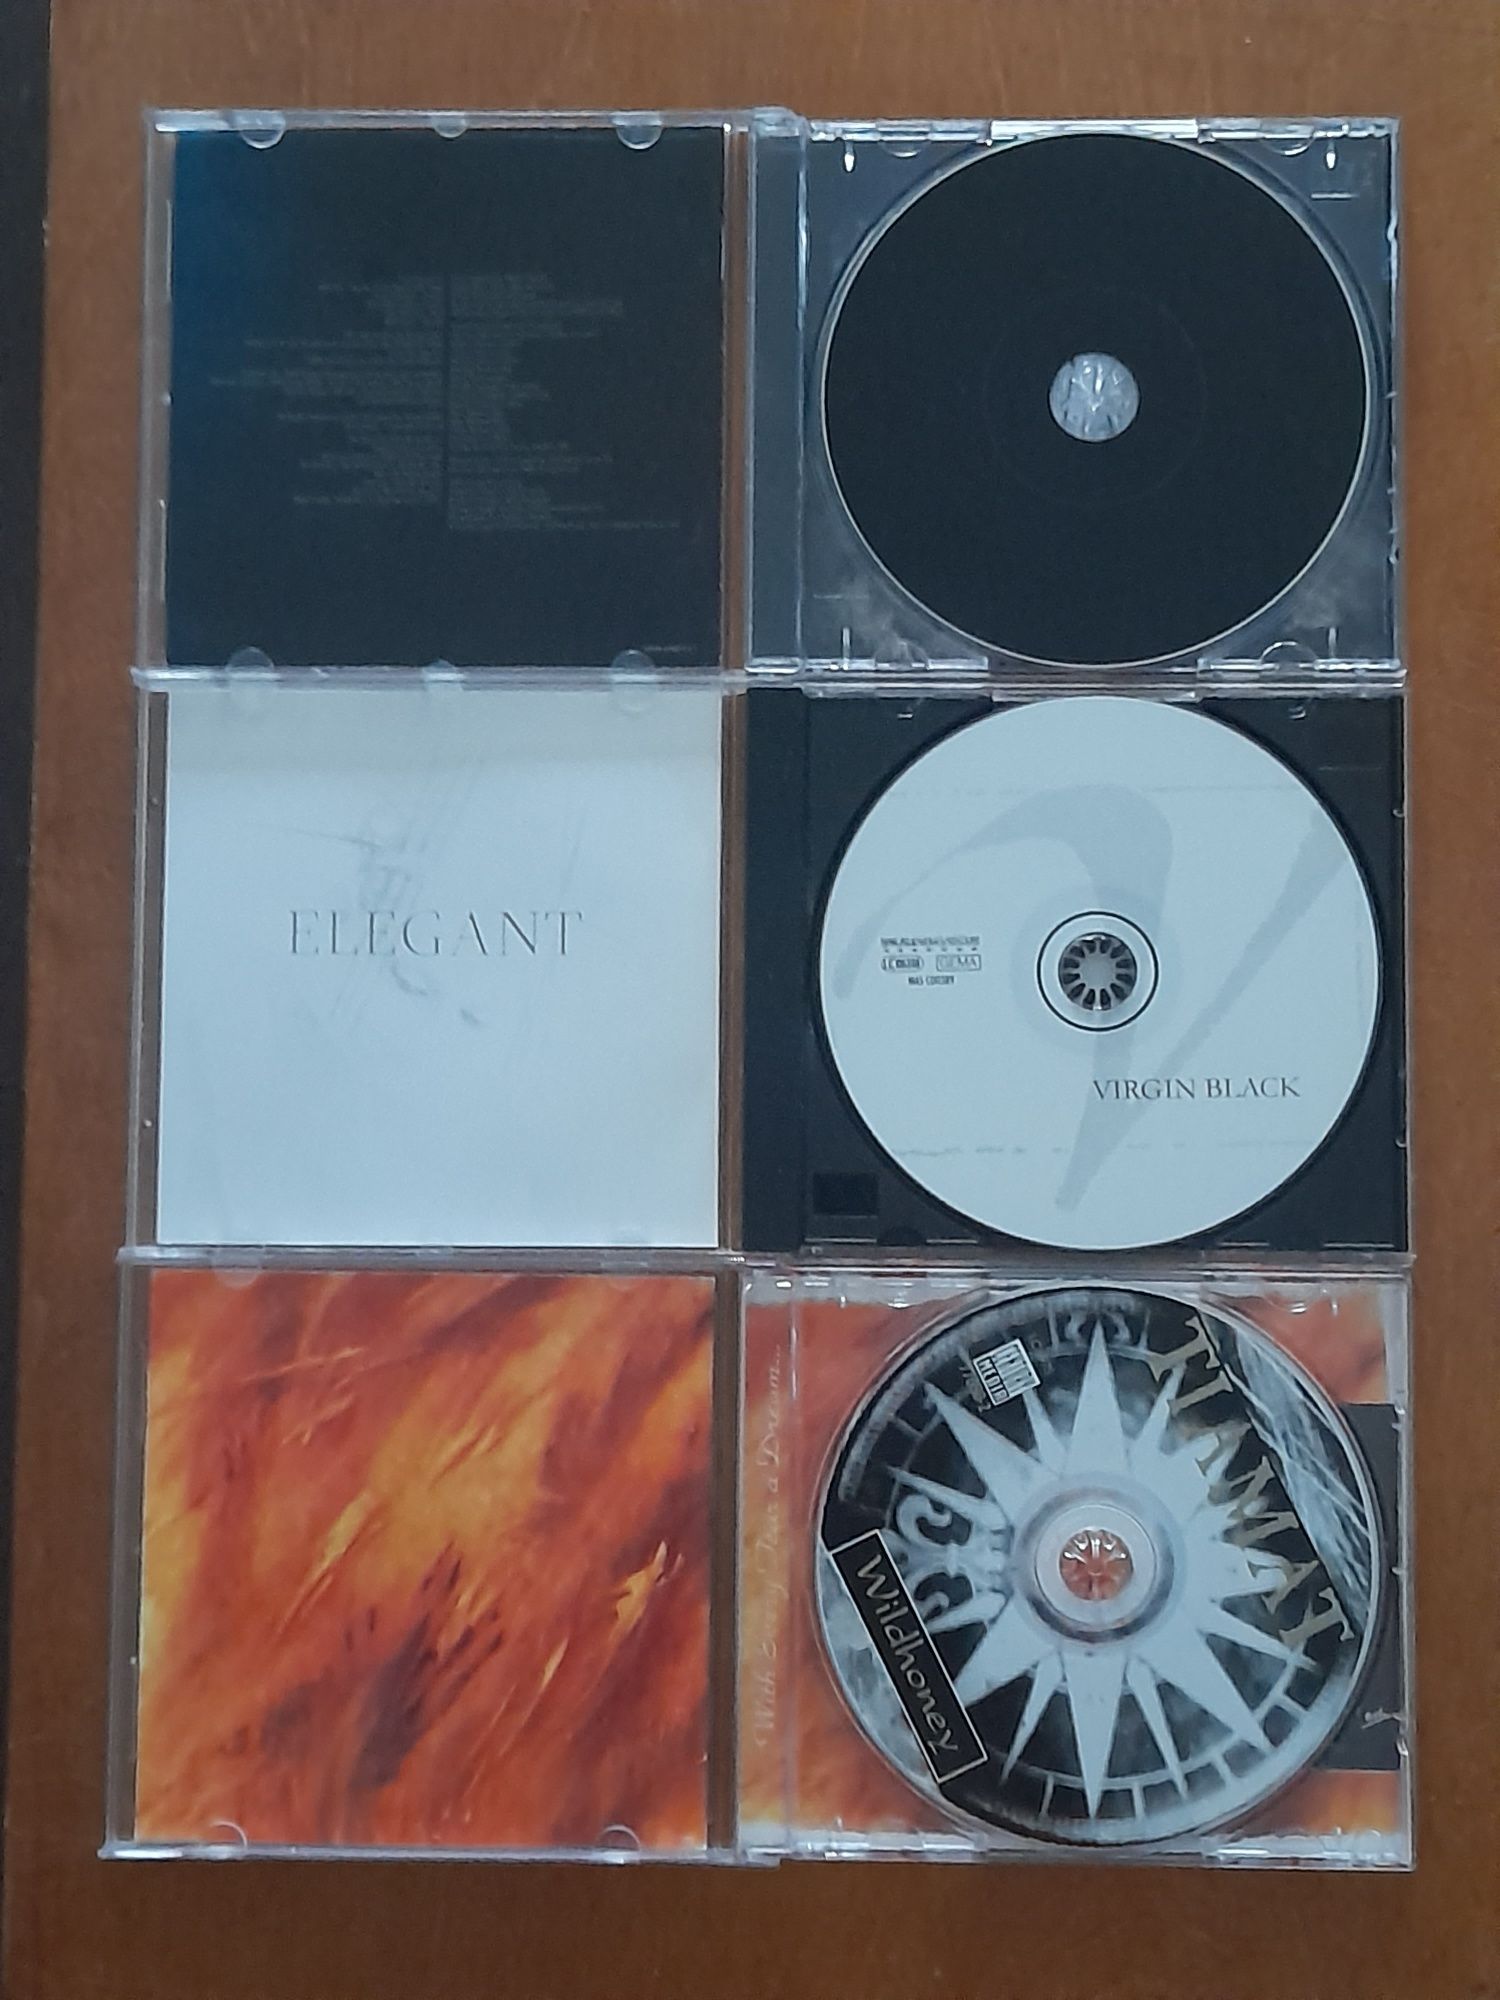 Фирменные CD диски After Forever, Evanescence, Darkseed,Tiamat